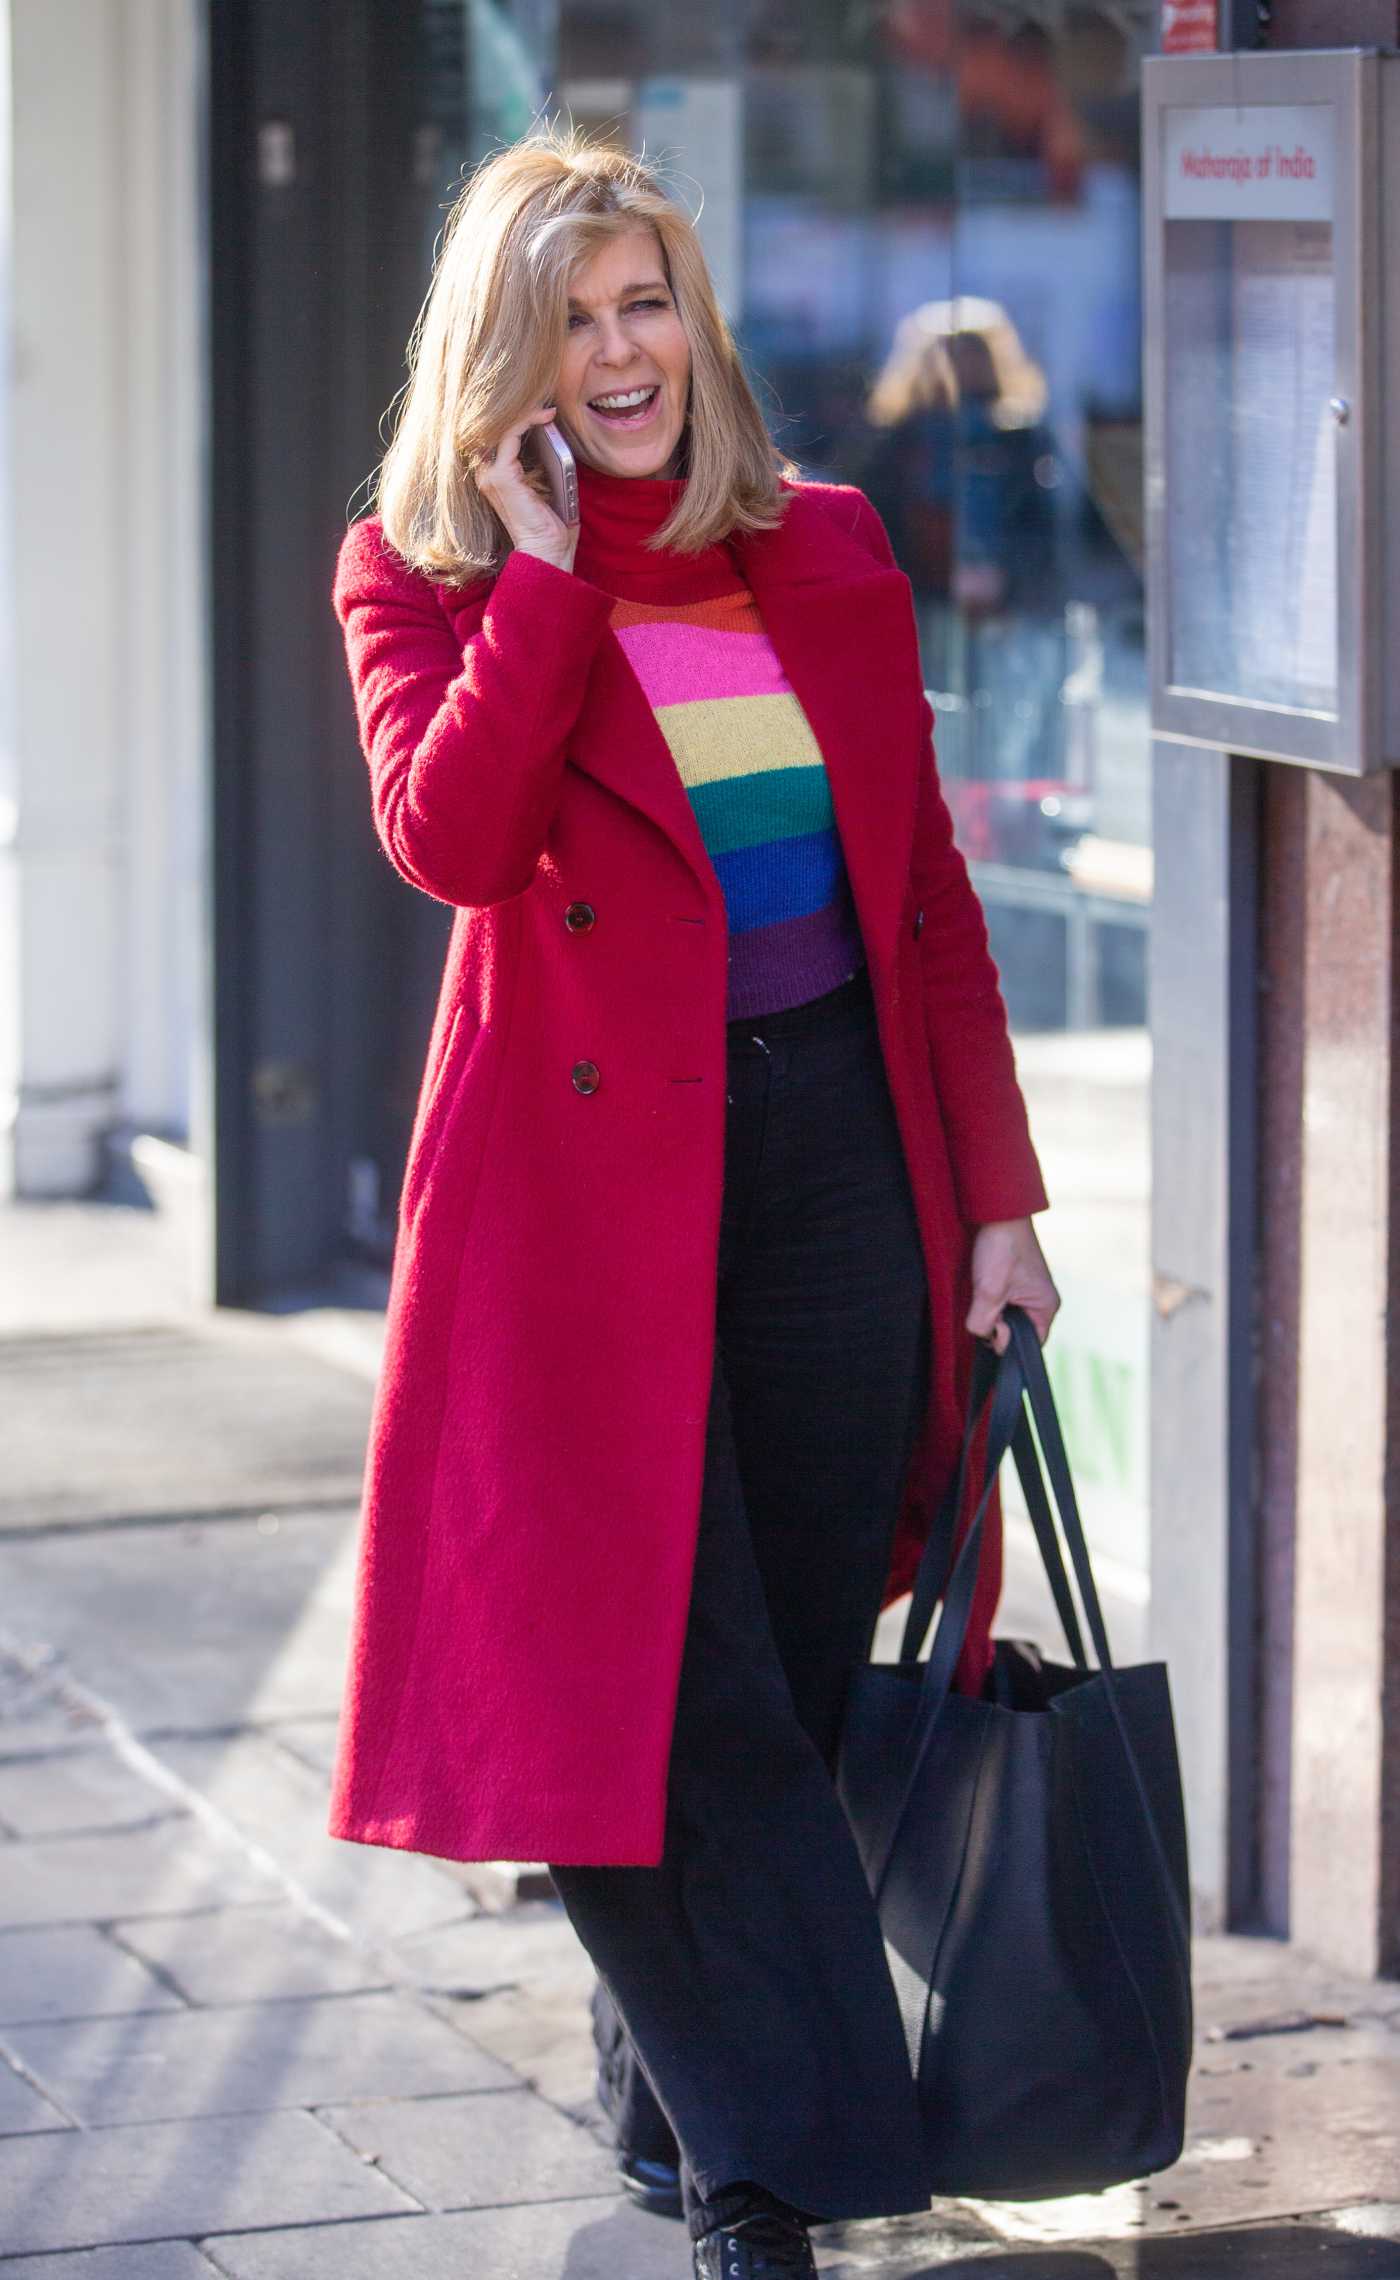 Kate Garraway in a Red Coat Arrives at the Global Offices in London 01/13/2022